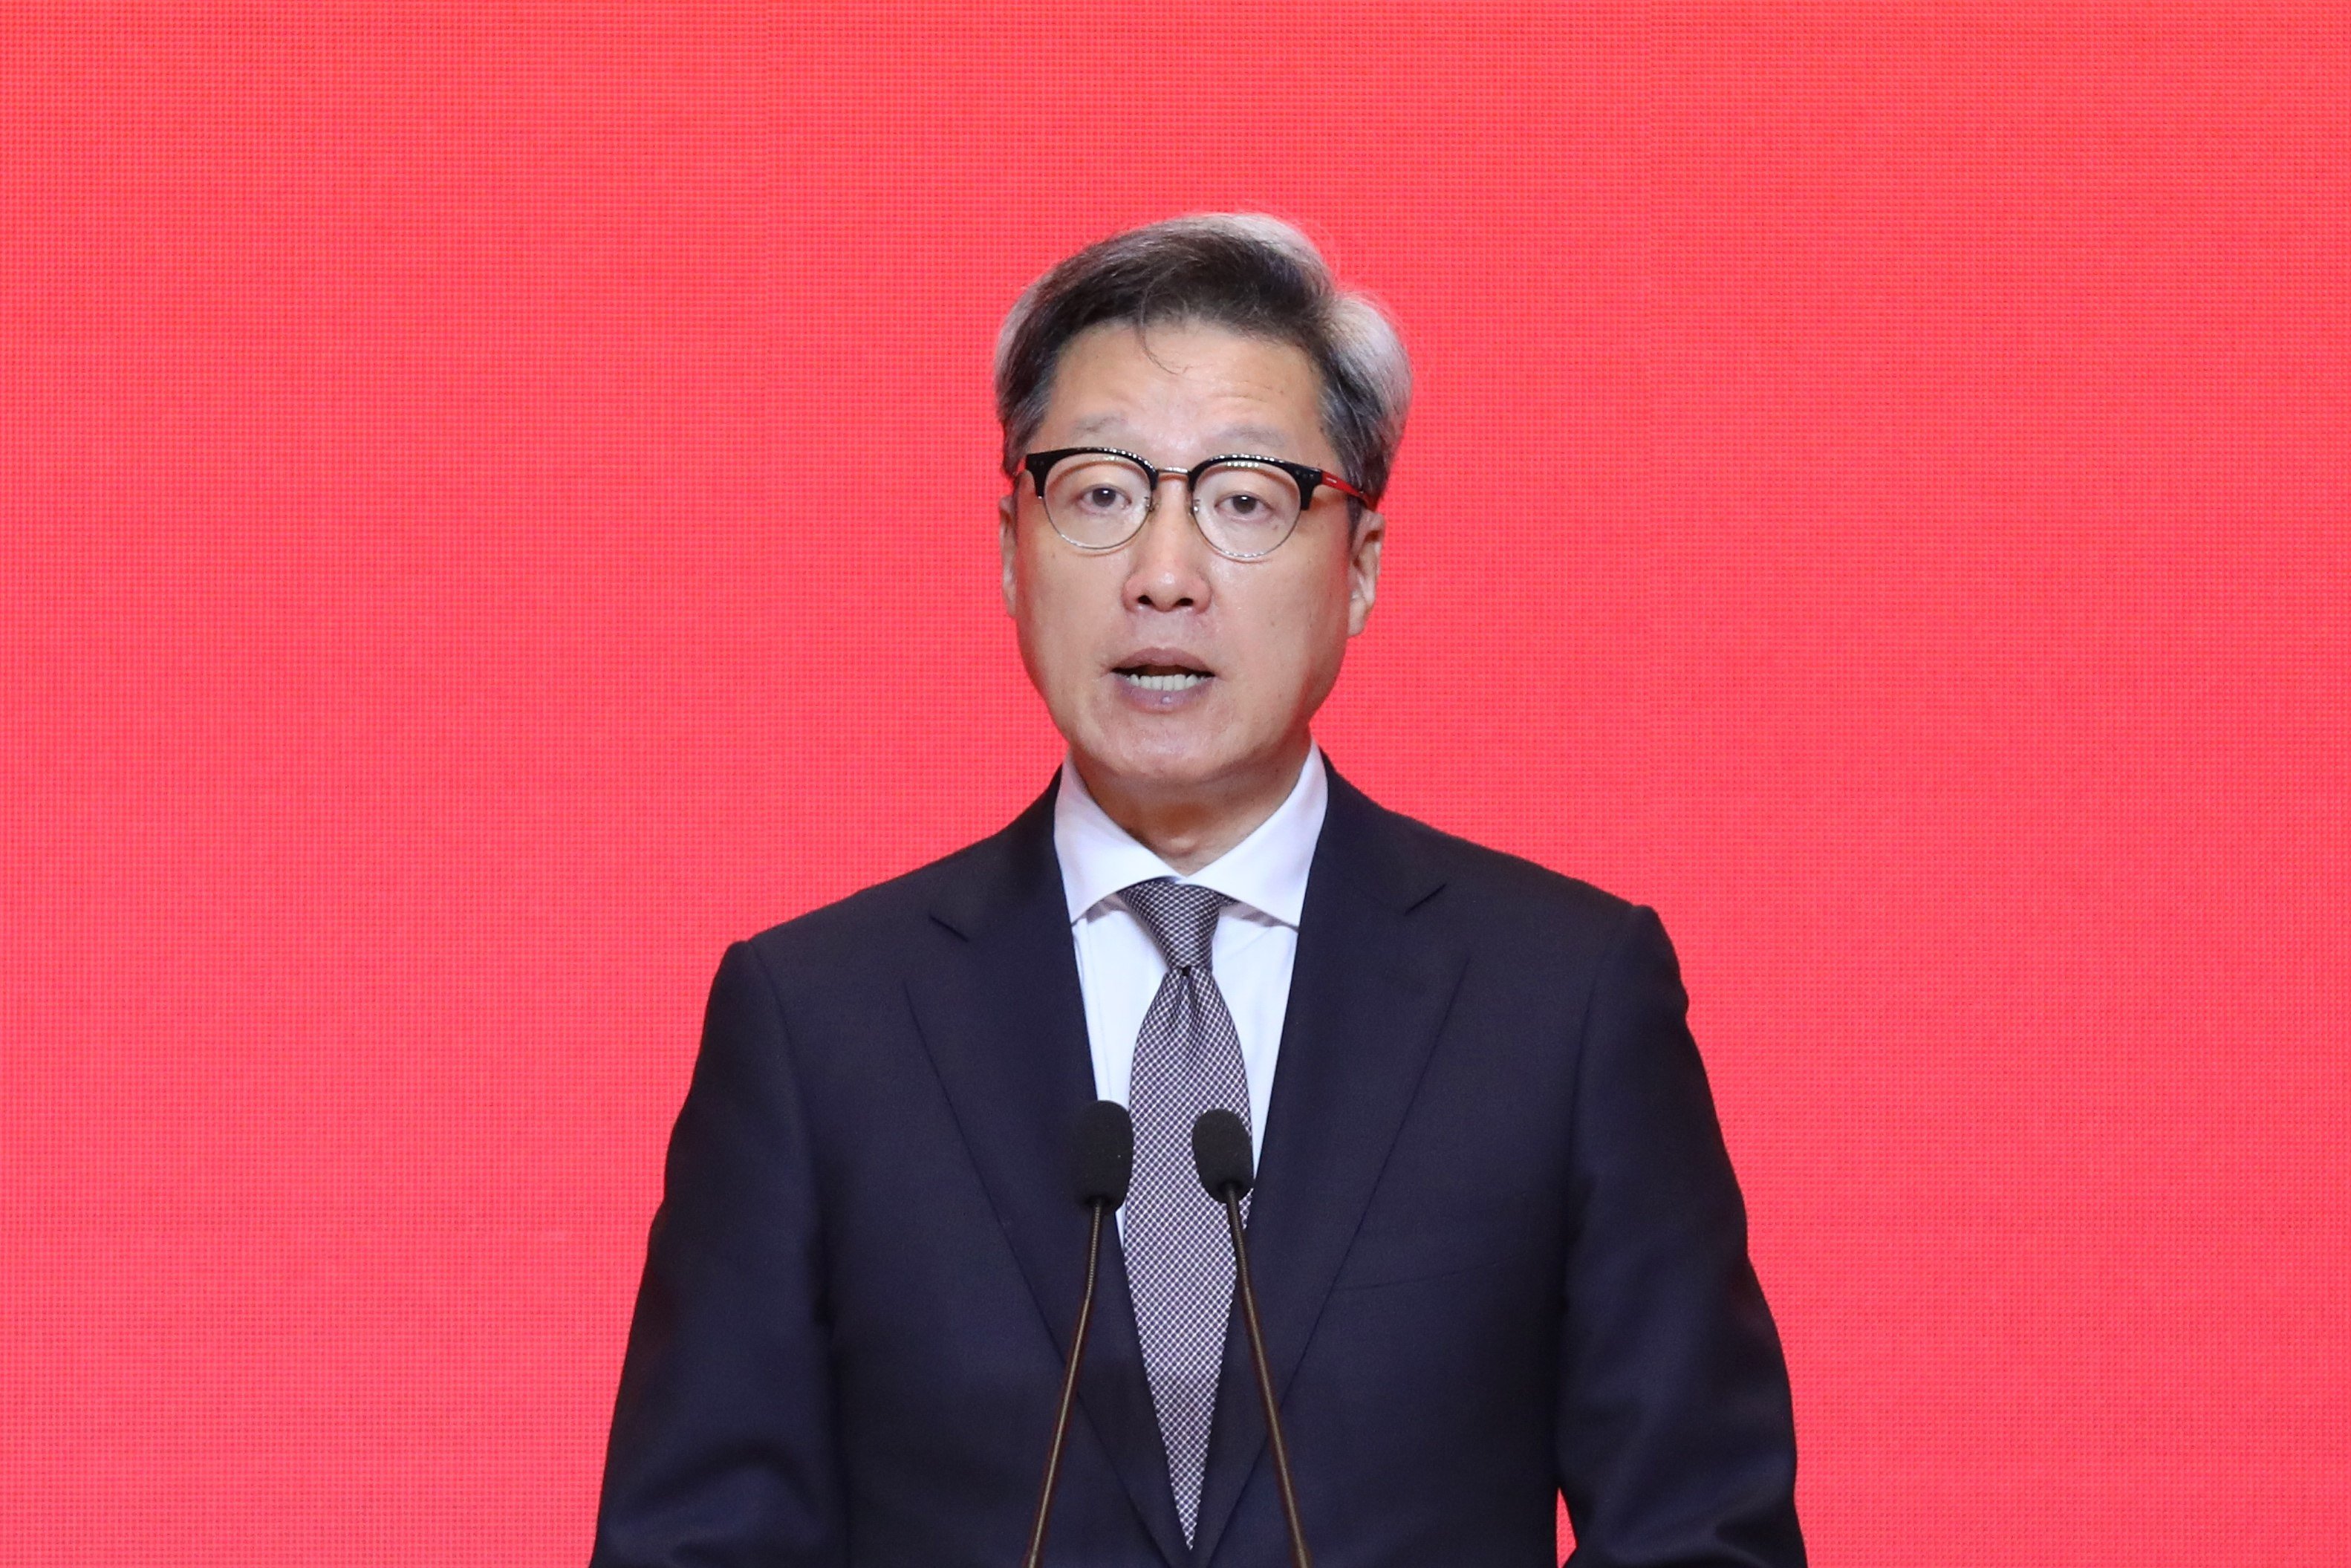 South Korea’s ambassador to China Chung Jae-ho speaks at a forum marking the 30th anniversary of the establishment of diplomatic ties between Beijing and Seoul on August 24, 2022 in Beijing. Photo: VCG via Getty Images